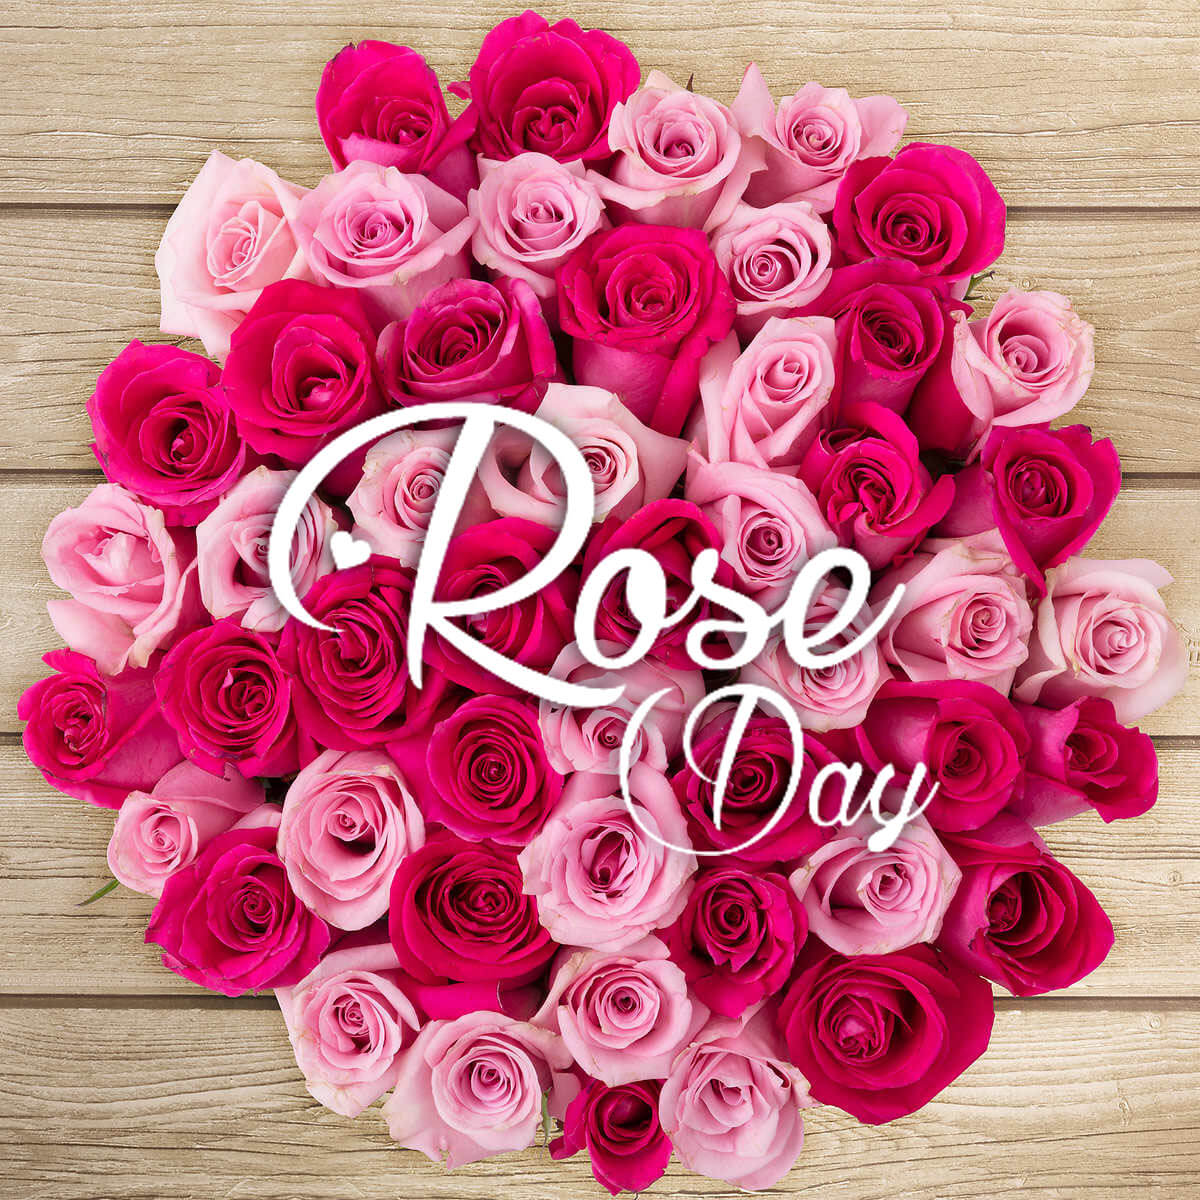 Happy Rose Day Pink Flower Love Wishes Greetings Image - Happy Rose Day Hd , HD Wallpaper & Backgrounds